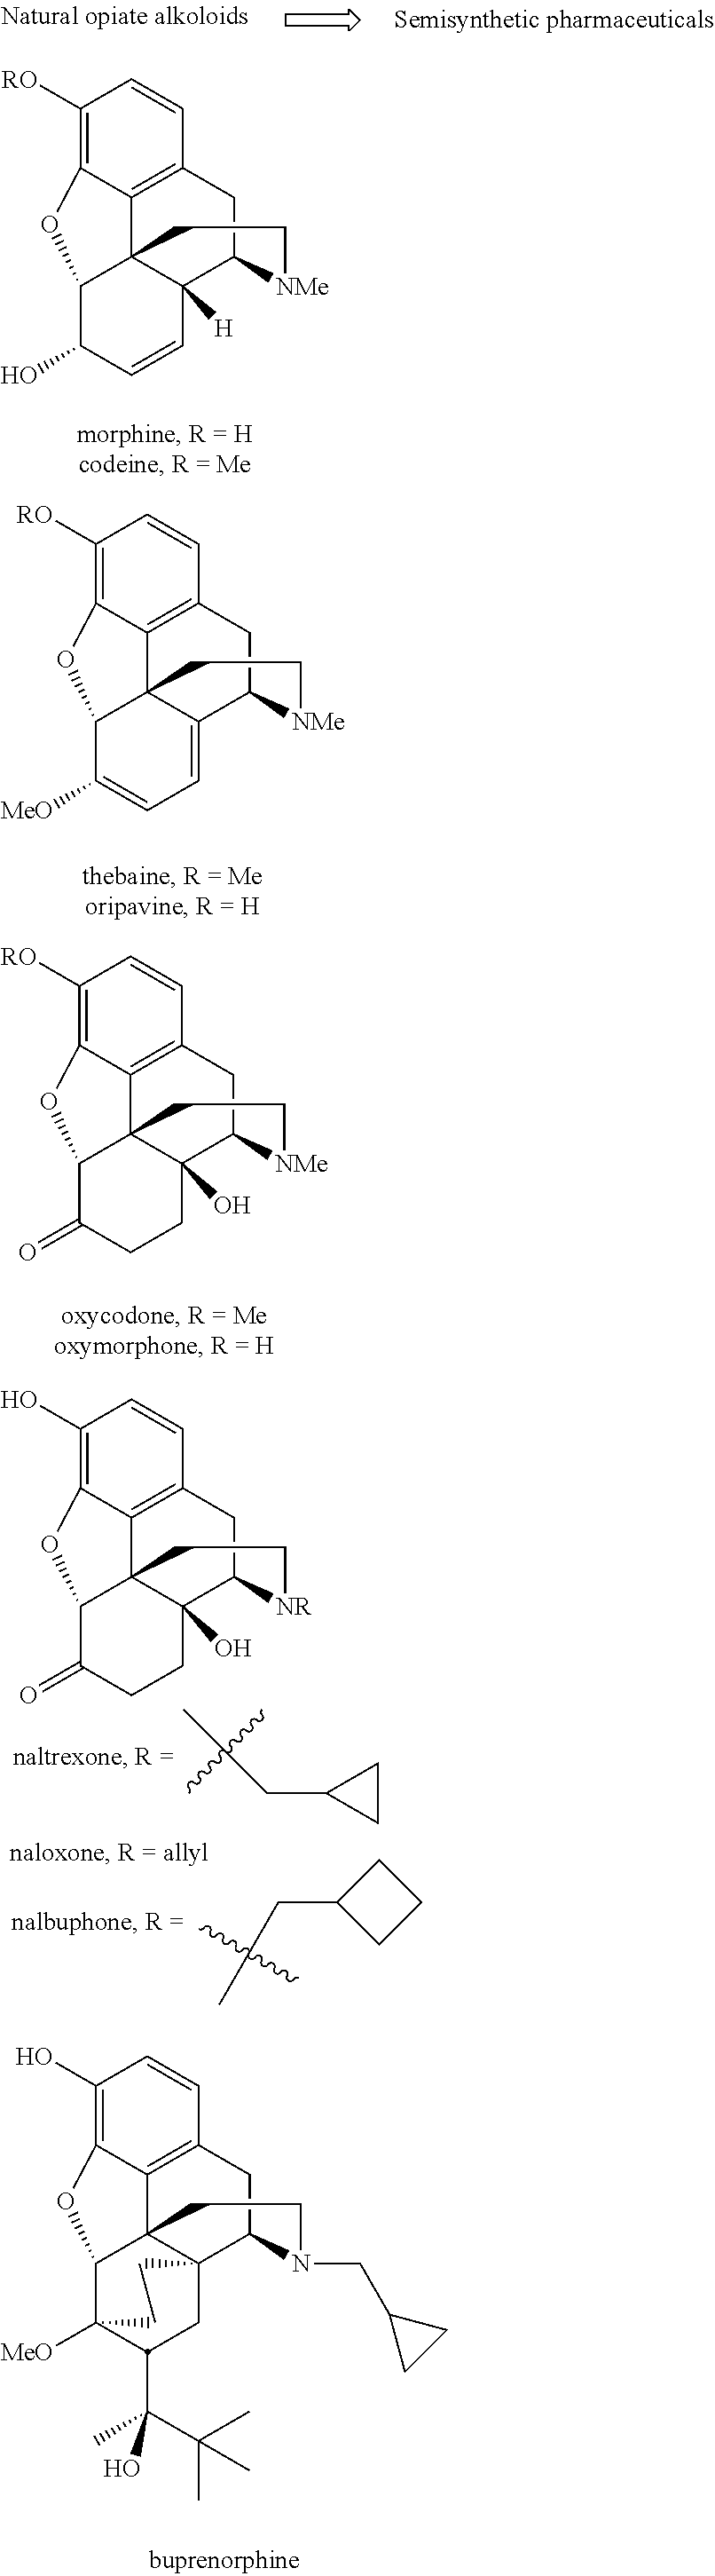 Methods for One-Pot N-Demethylation/N-Functionalization of Morphine and Tropane Alkaloids